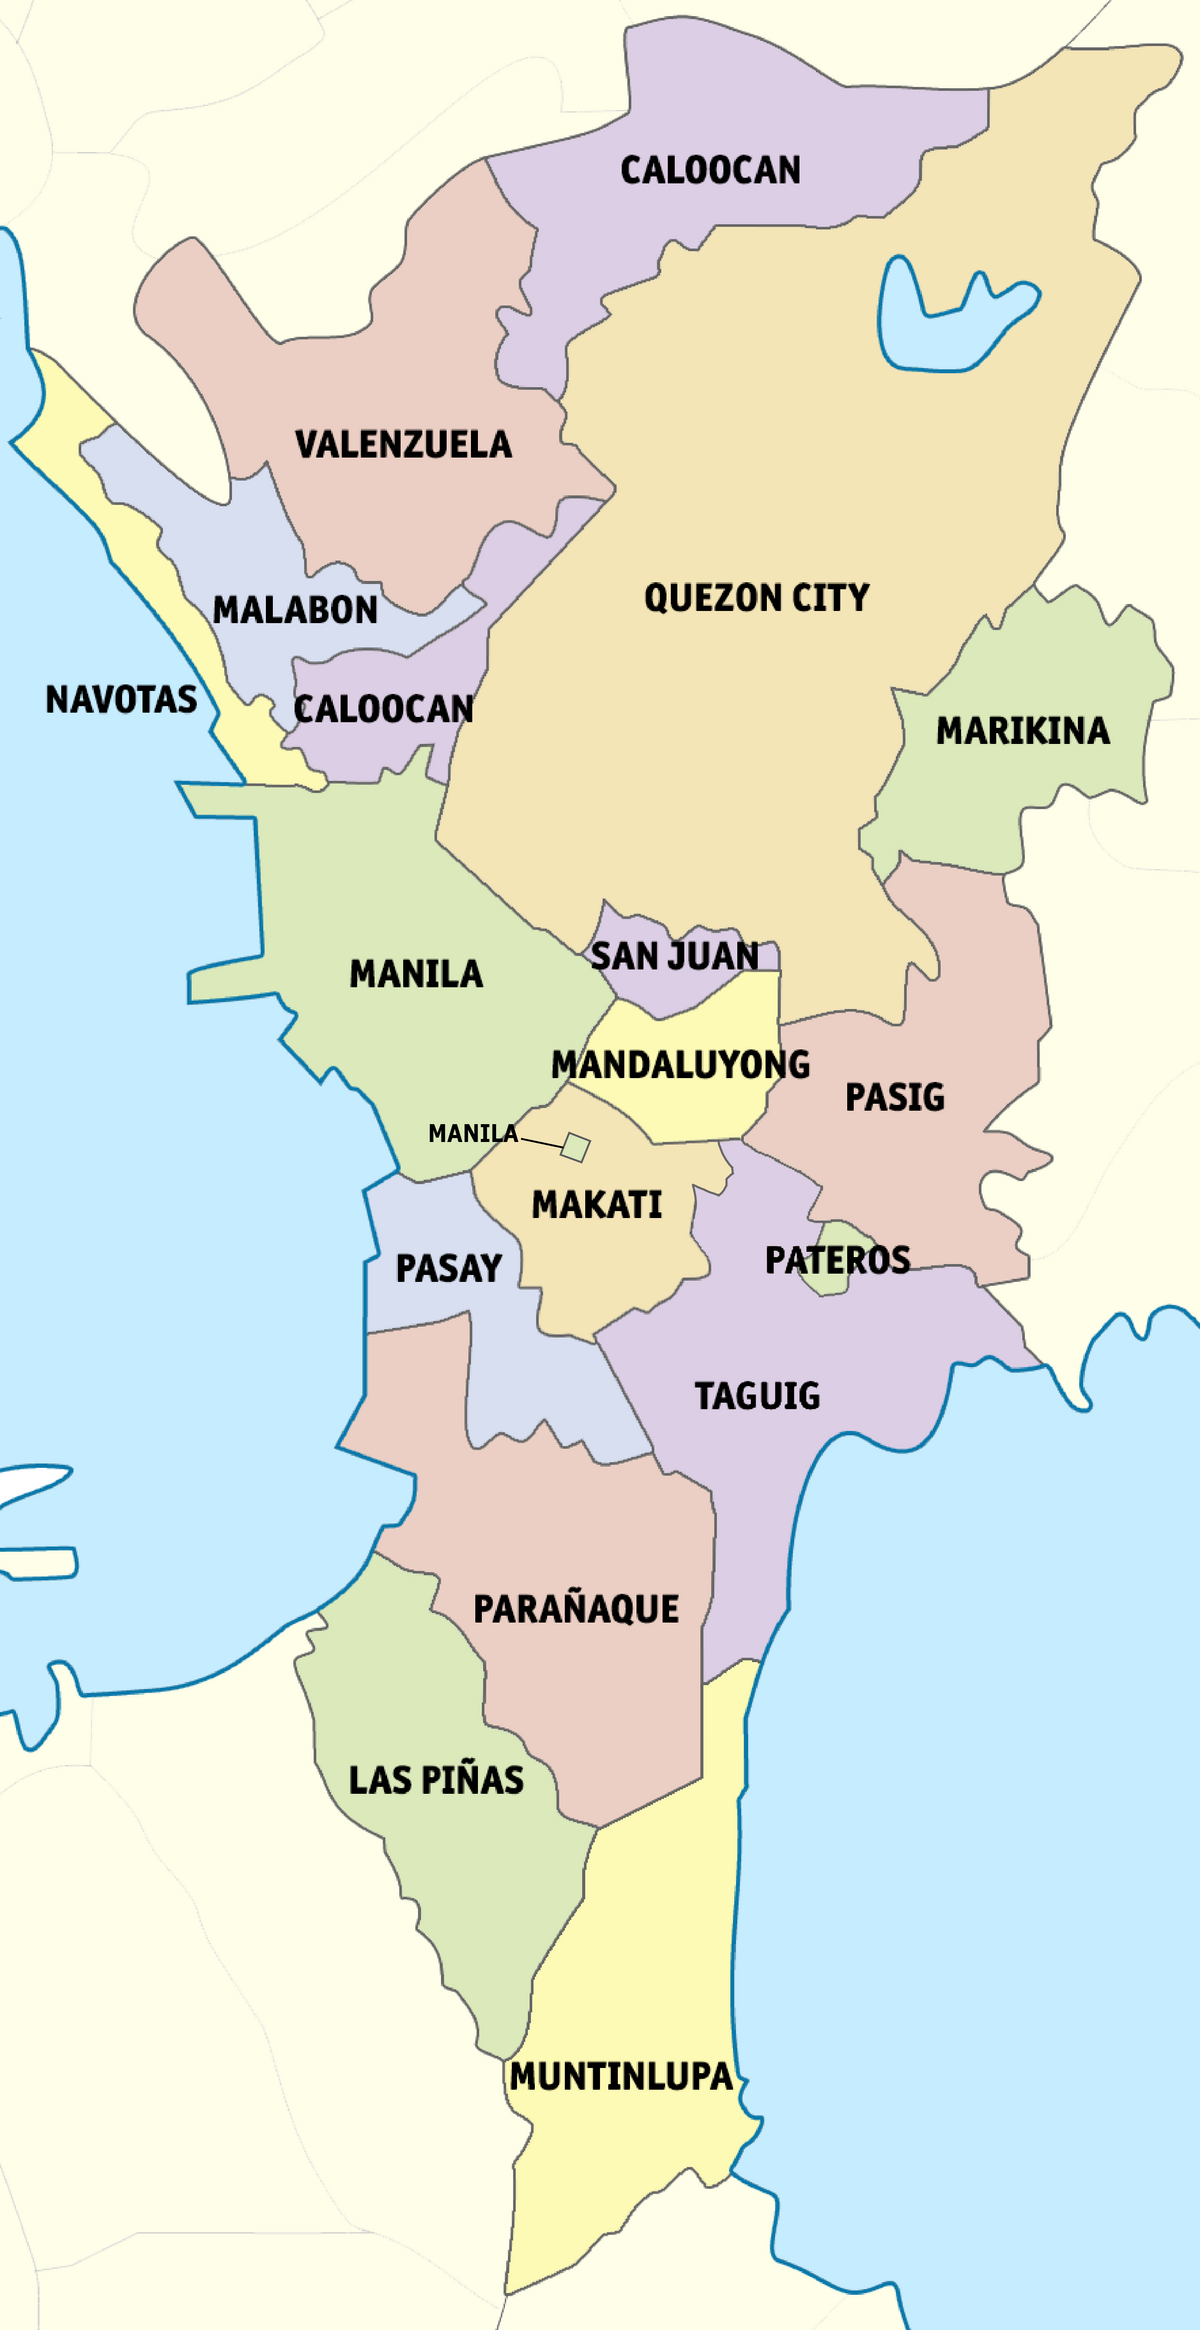 Is Metro Manila a city or state?